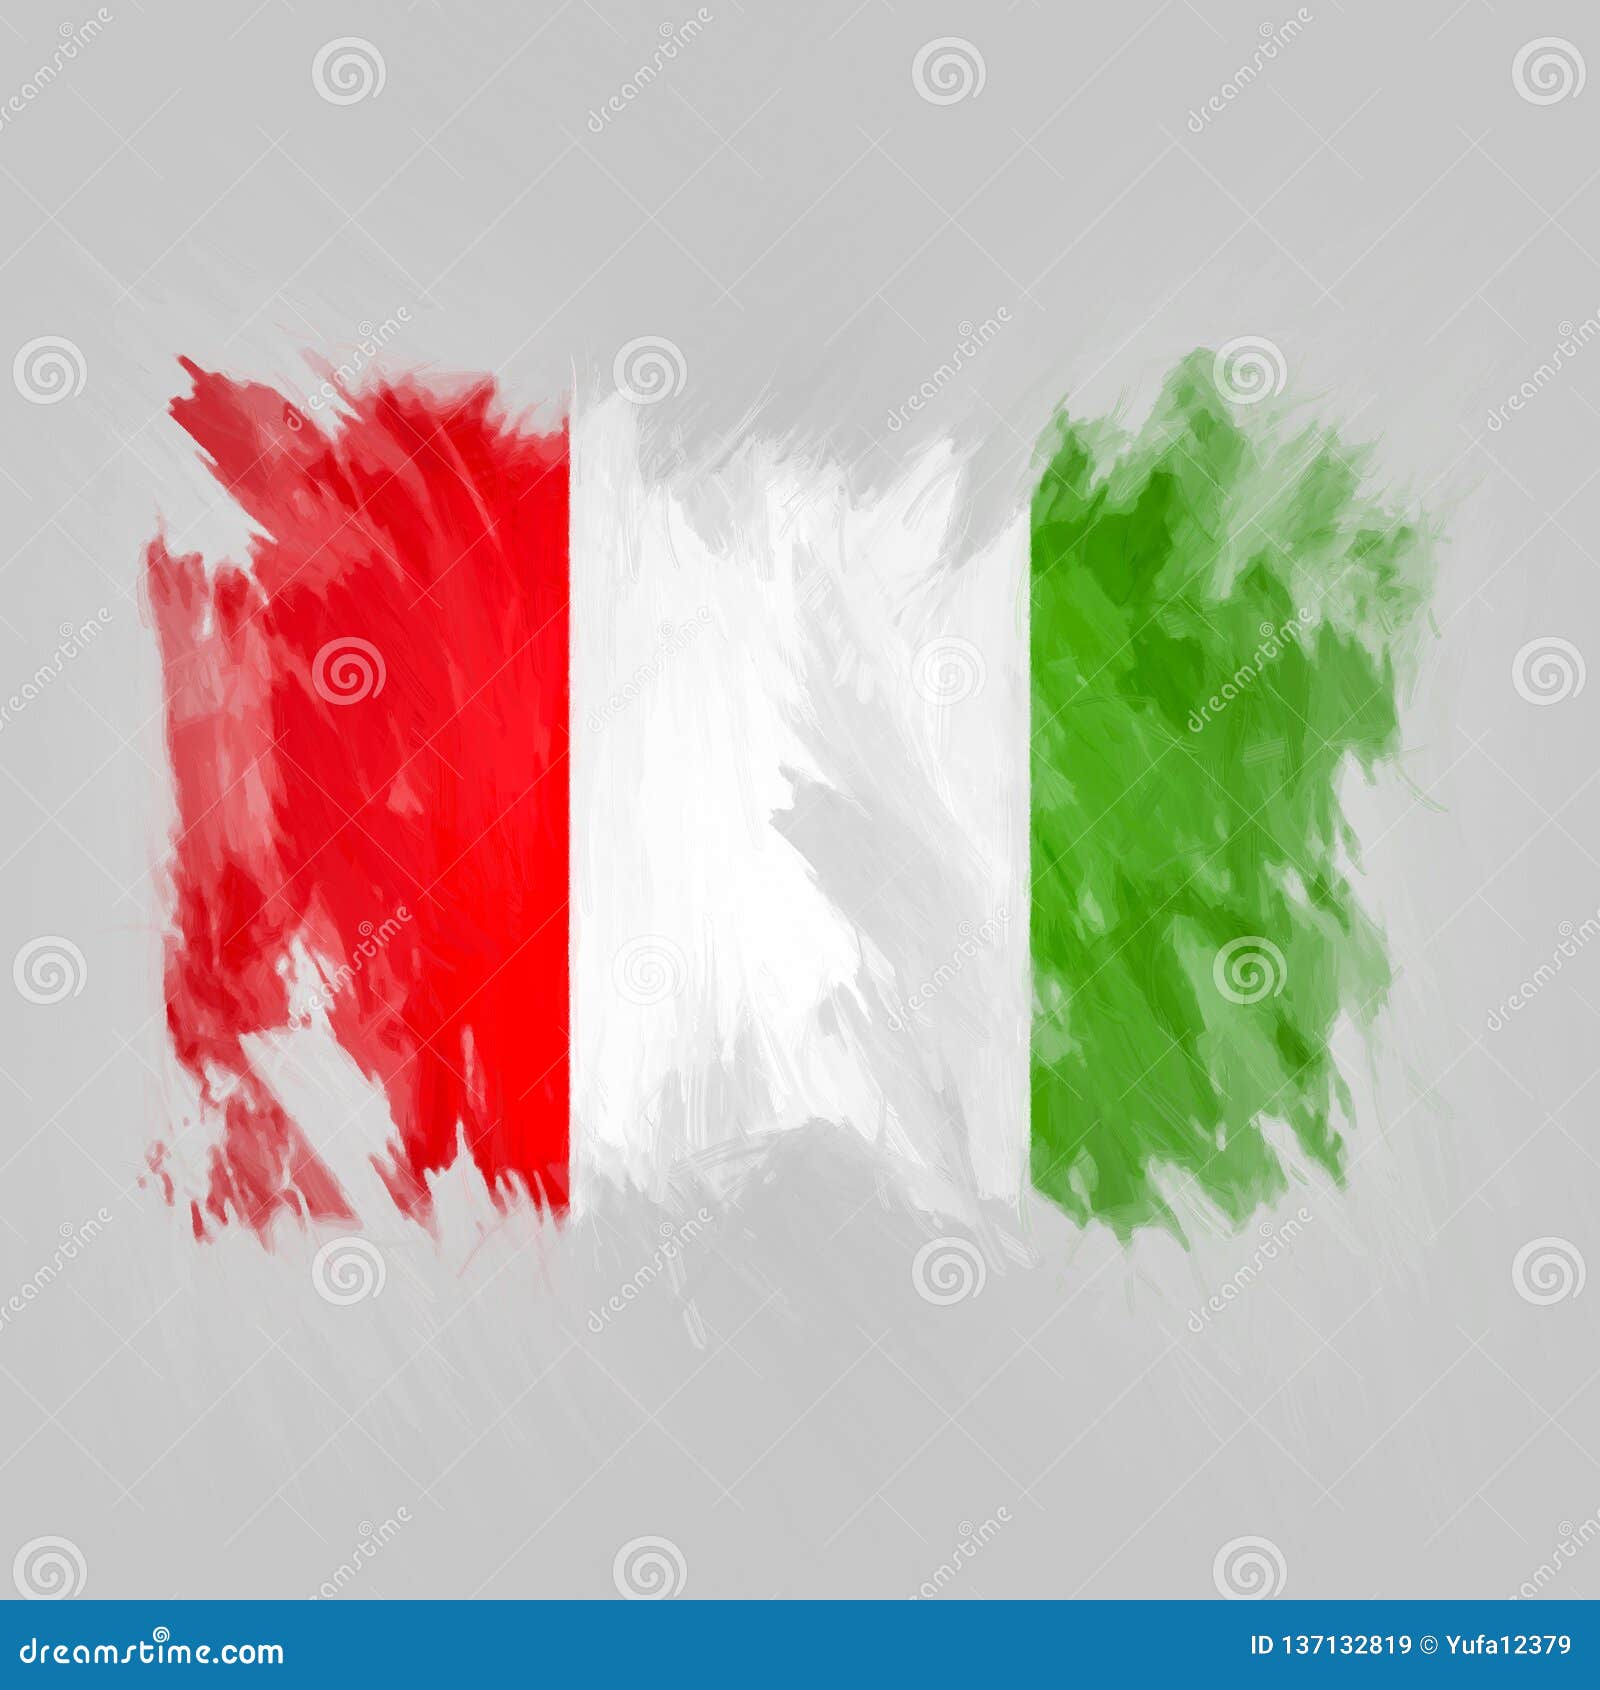 Watercolor Flag of Italy. Art Painted Italy National Flag Stock ...